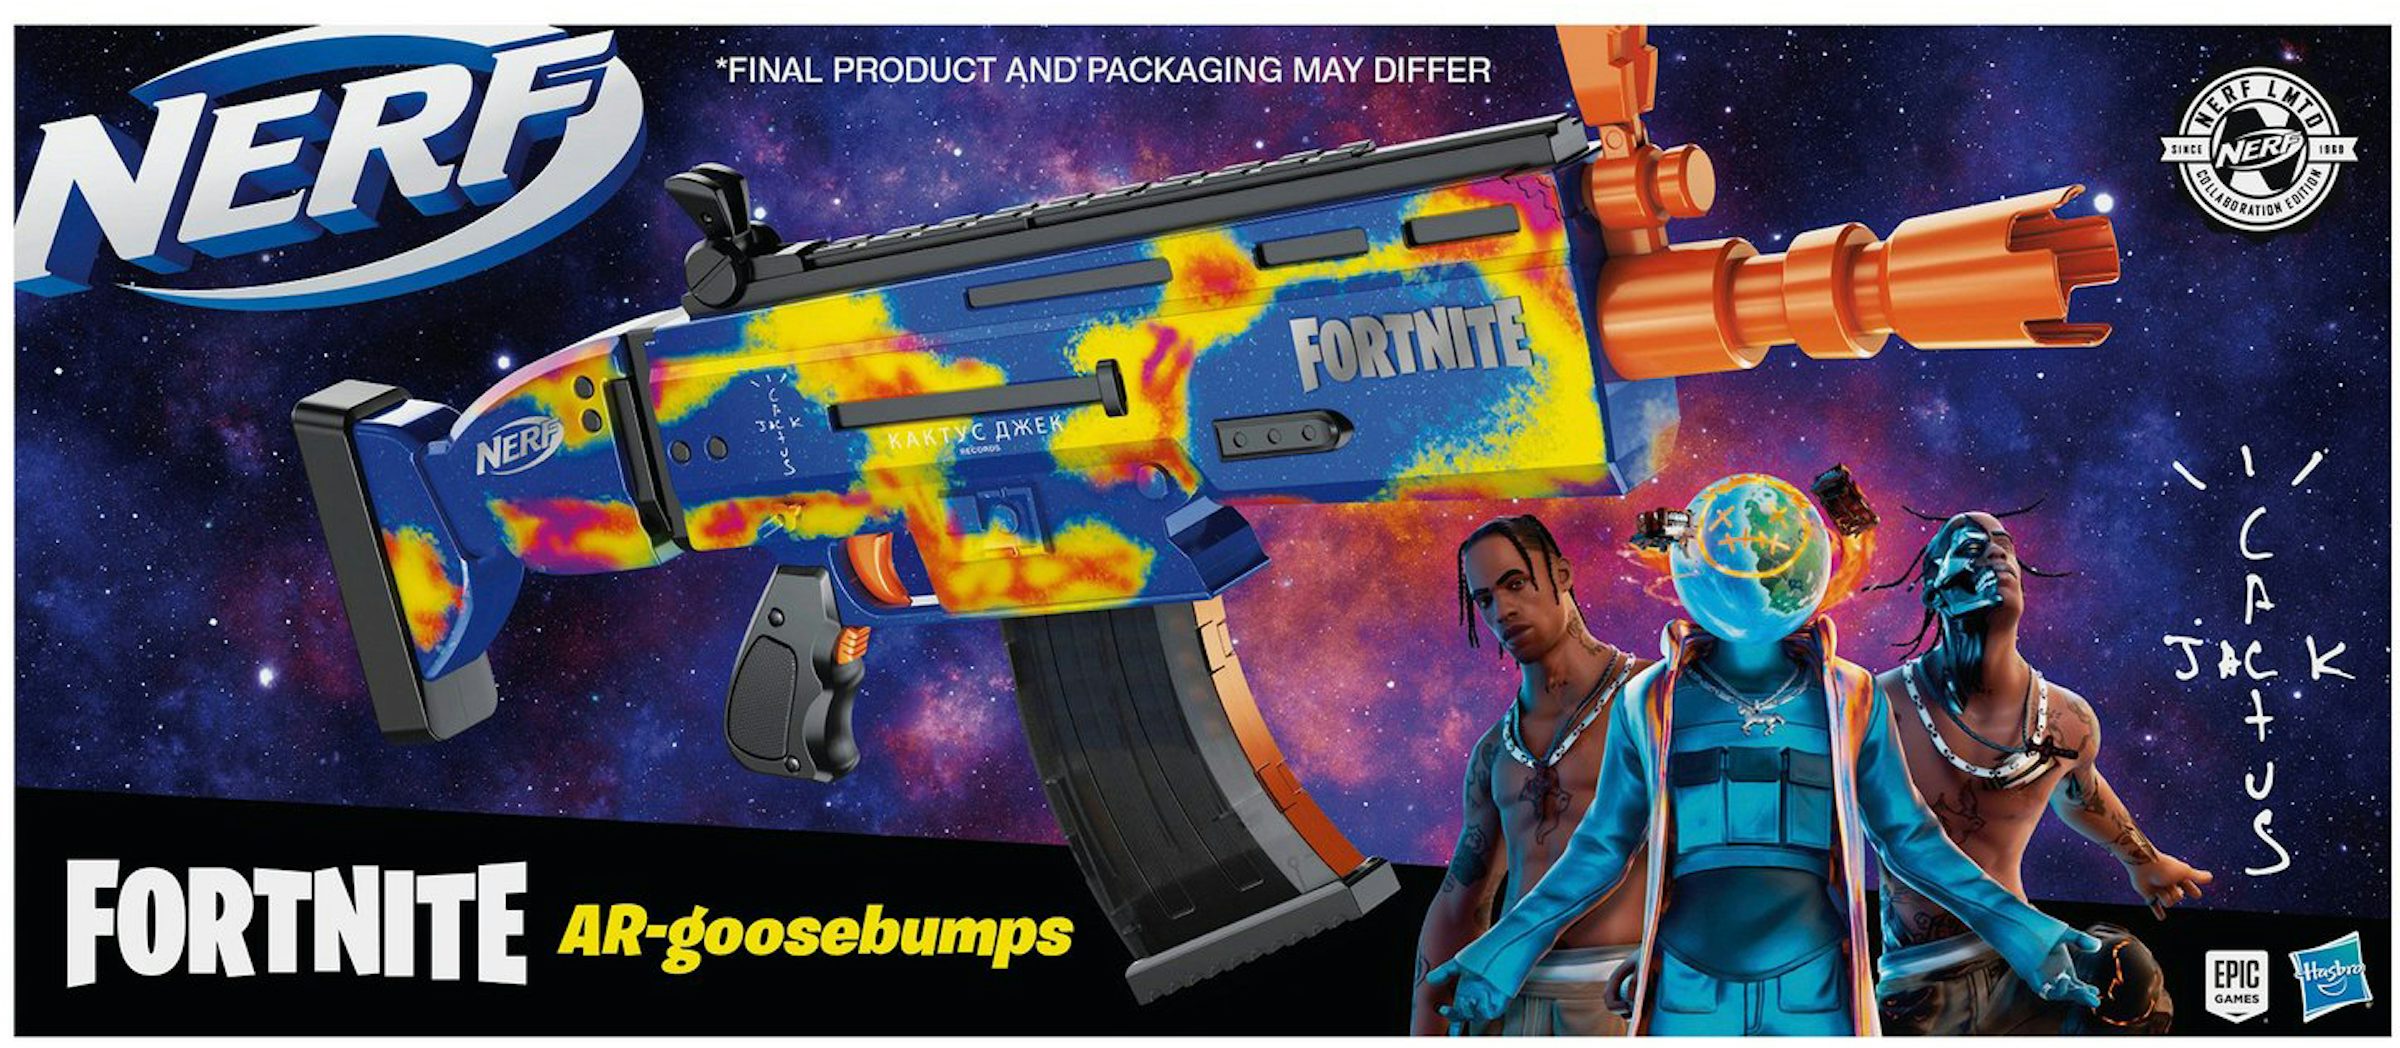 This is the Fortnite Nerf gun